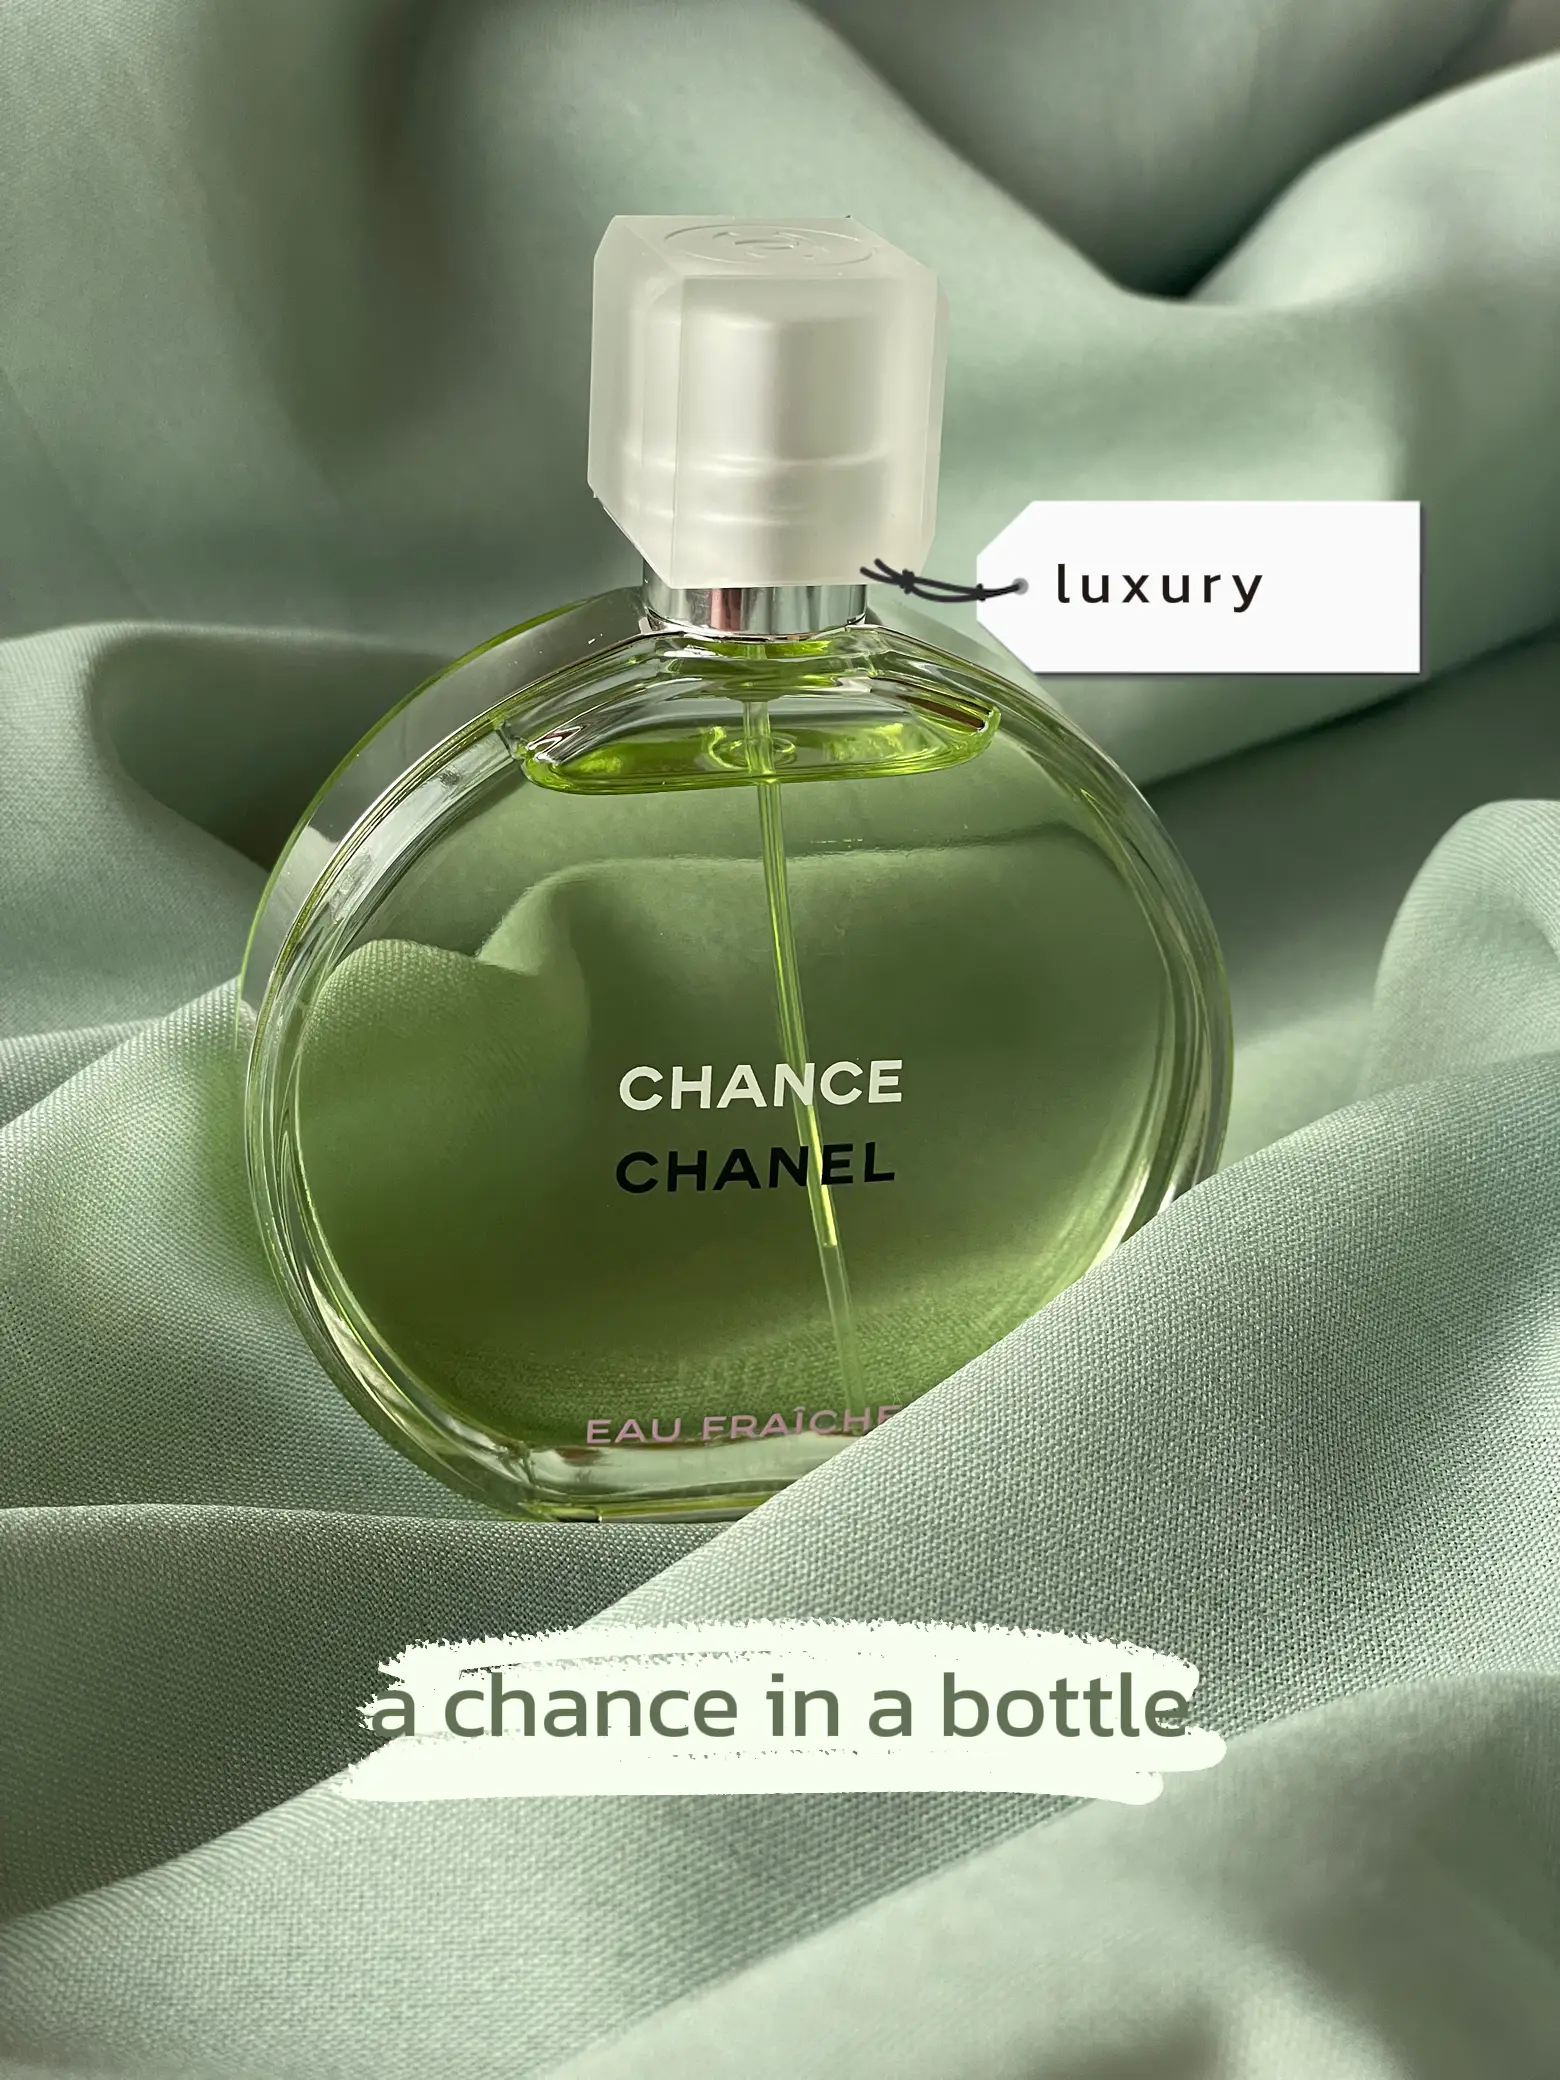 A chance in a bottle by chanel, Gallery posted by Raz